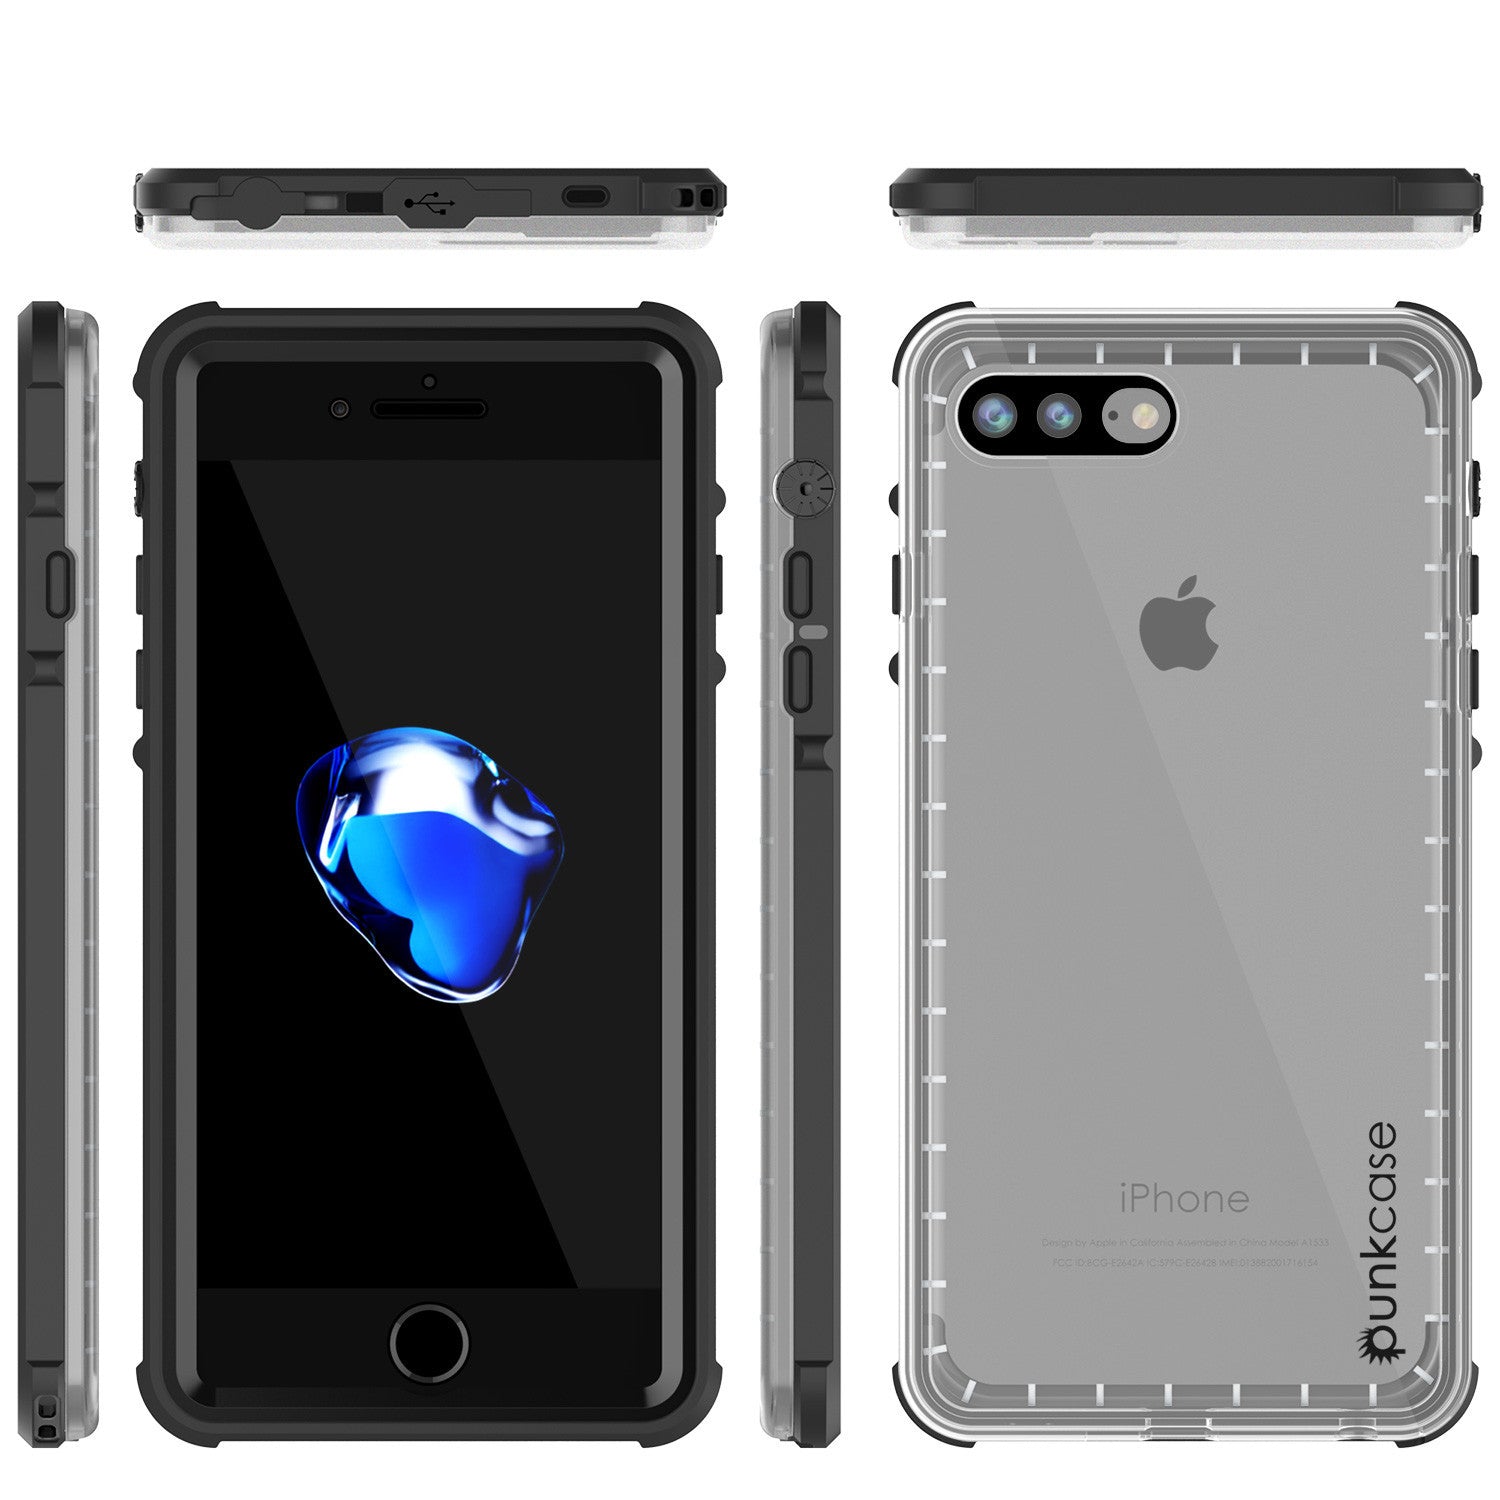 iPhone 7+ Plus Waterproof Case, PUNKcase CRYSTAL Black W/ Attached Screen Protector | Warranty